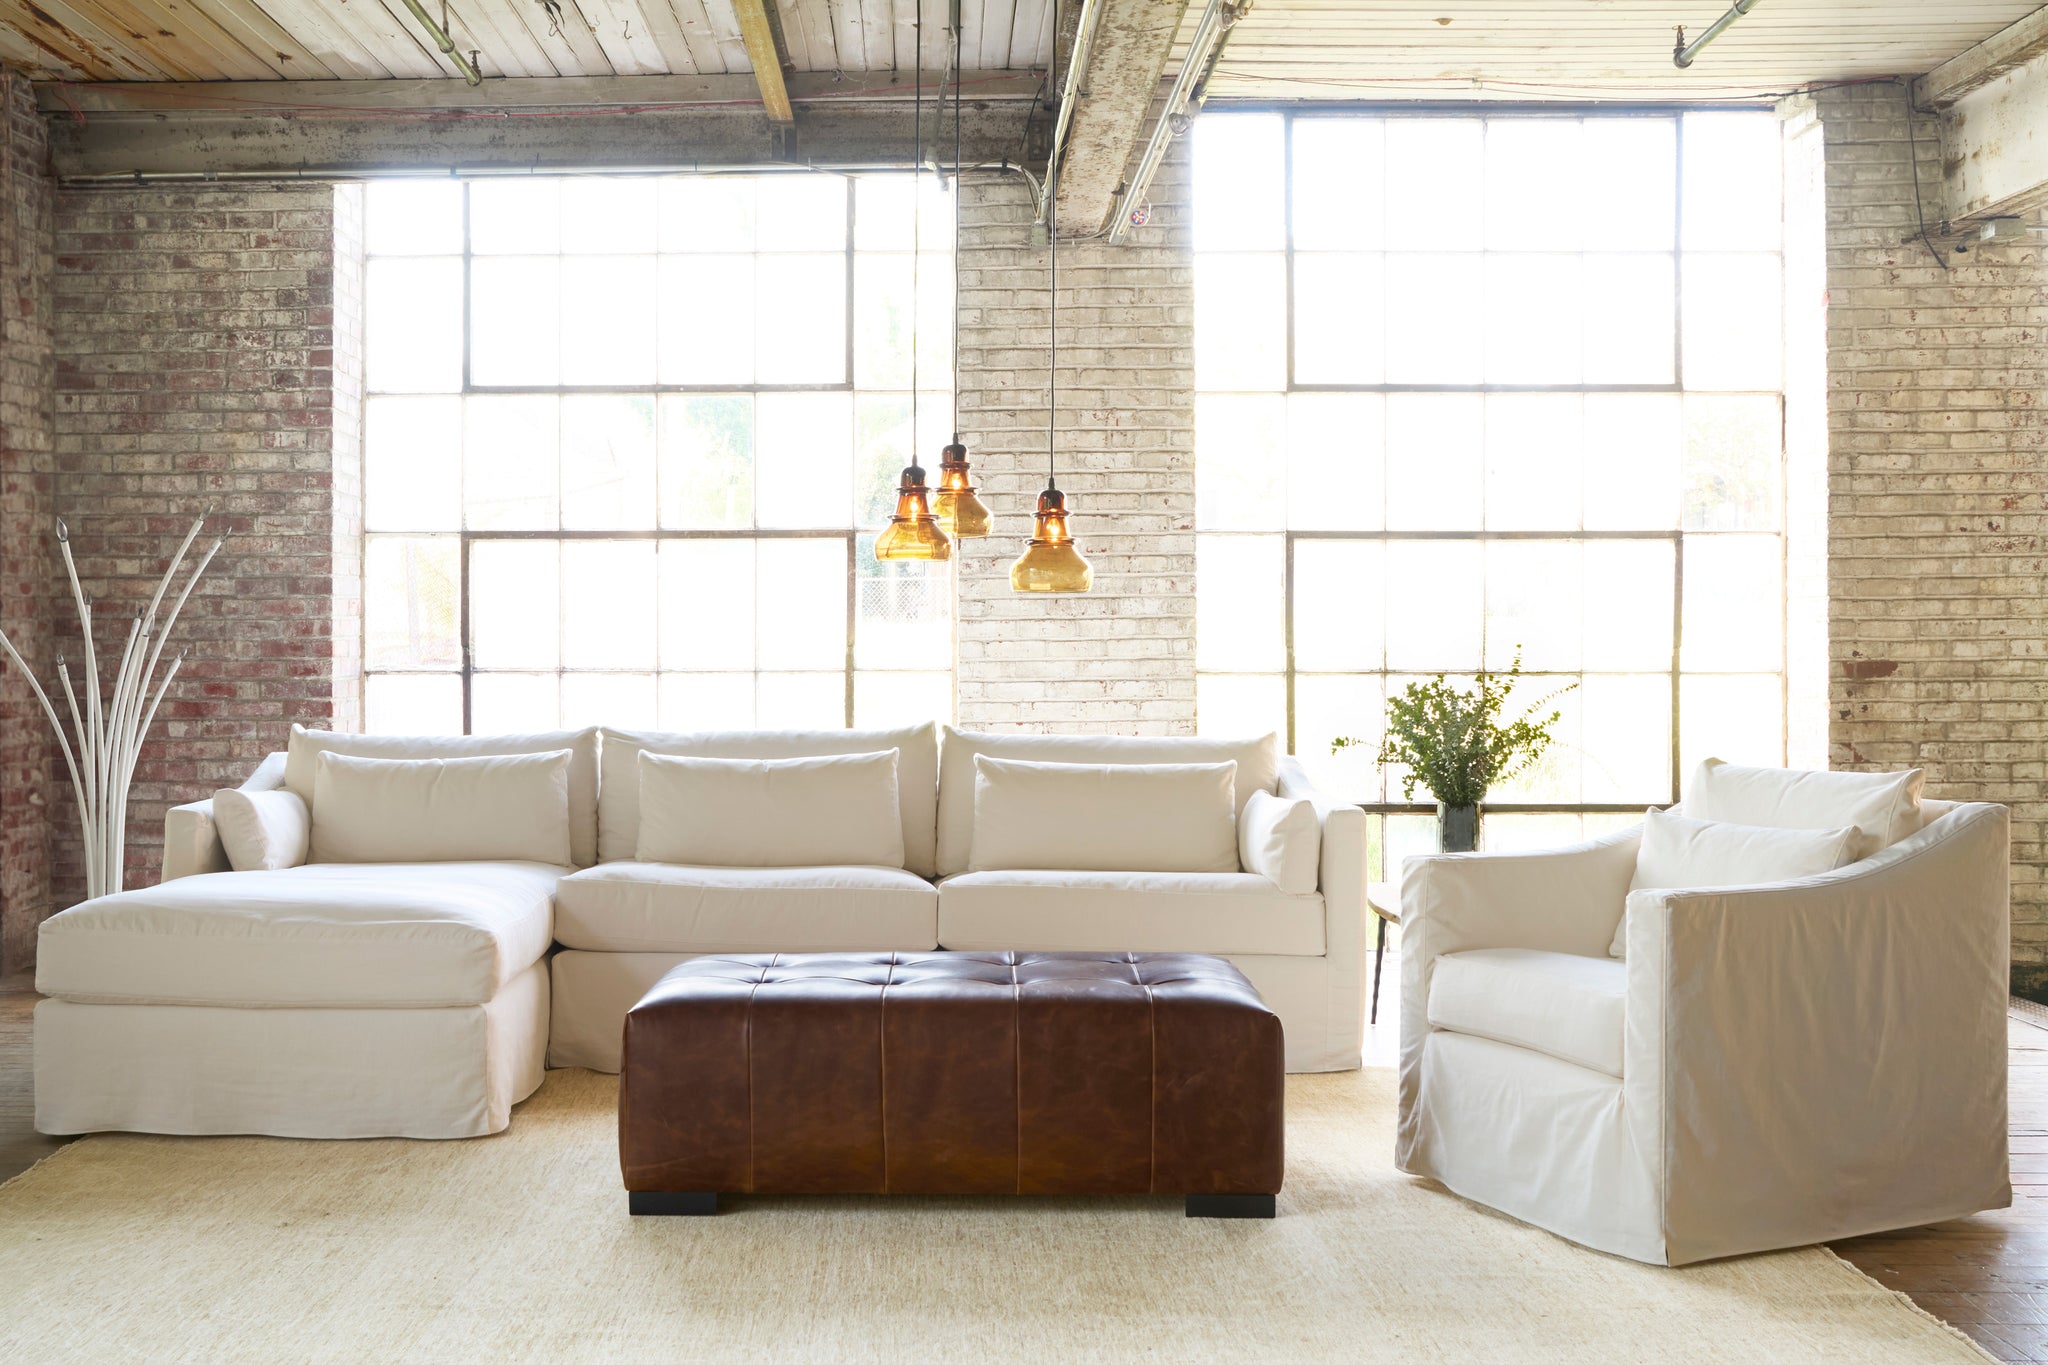  White sectional in front of 2 big windows and next to a white slipcovered chair. Brown leather ottoman in the middle and 3 brown glass pendants. Photographed in Molino Ivory. 